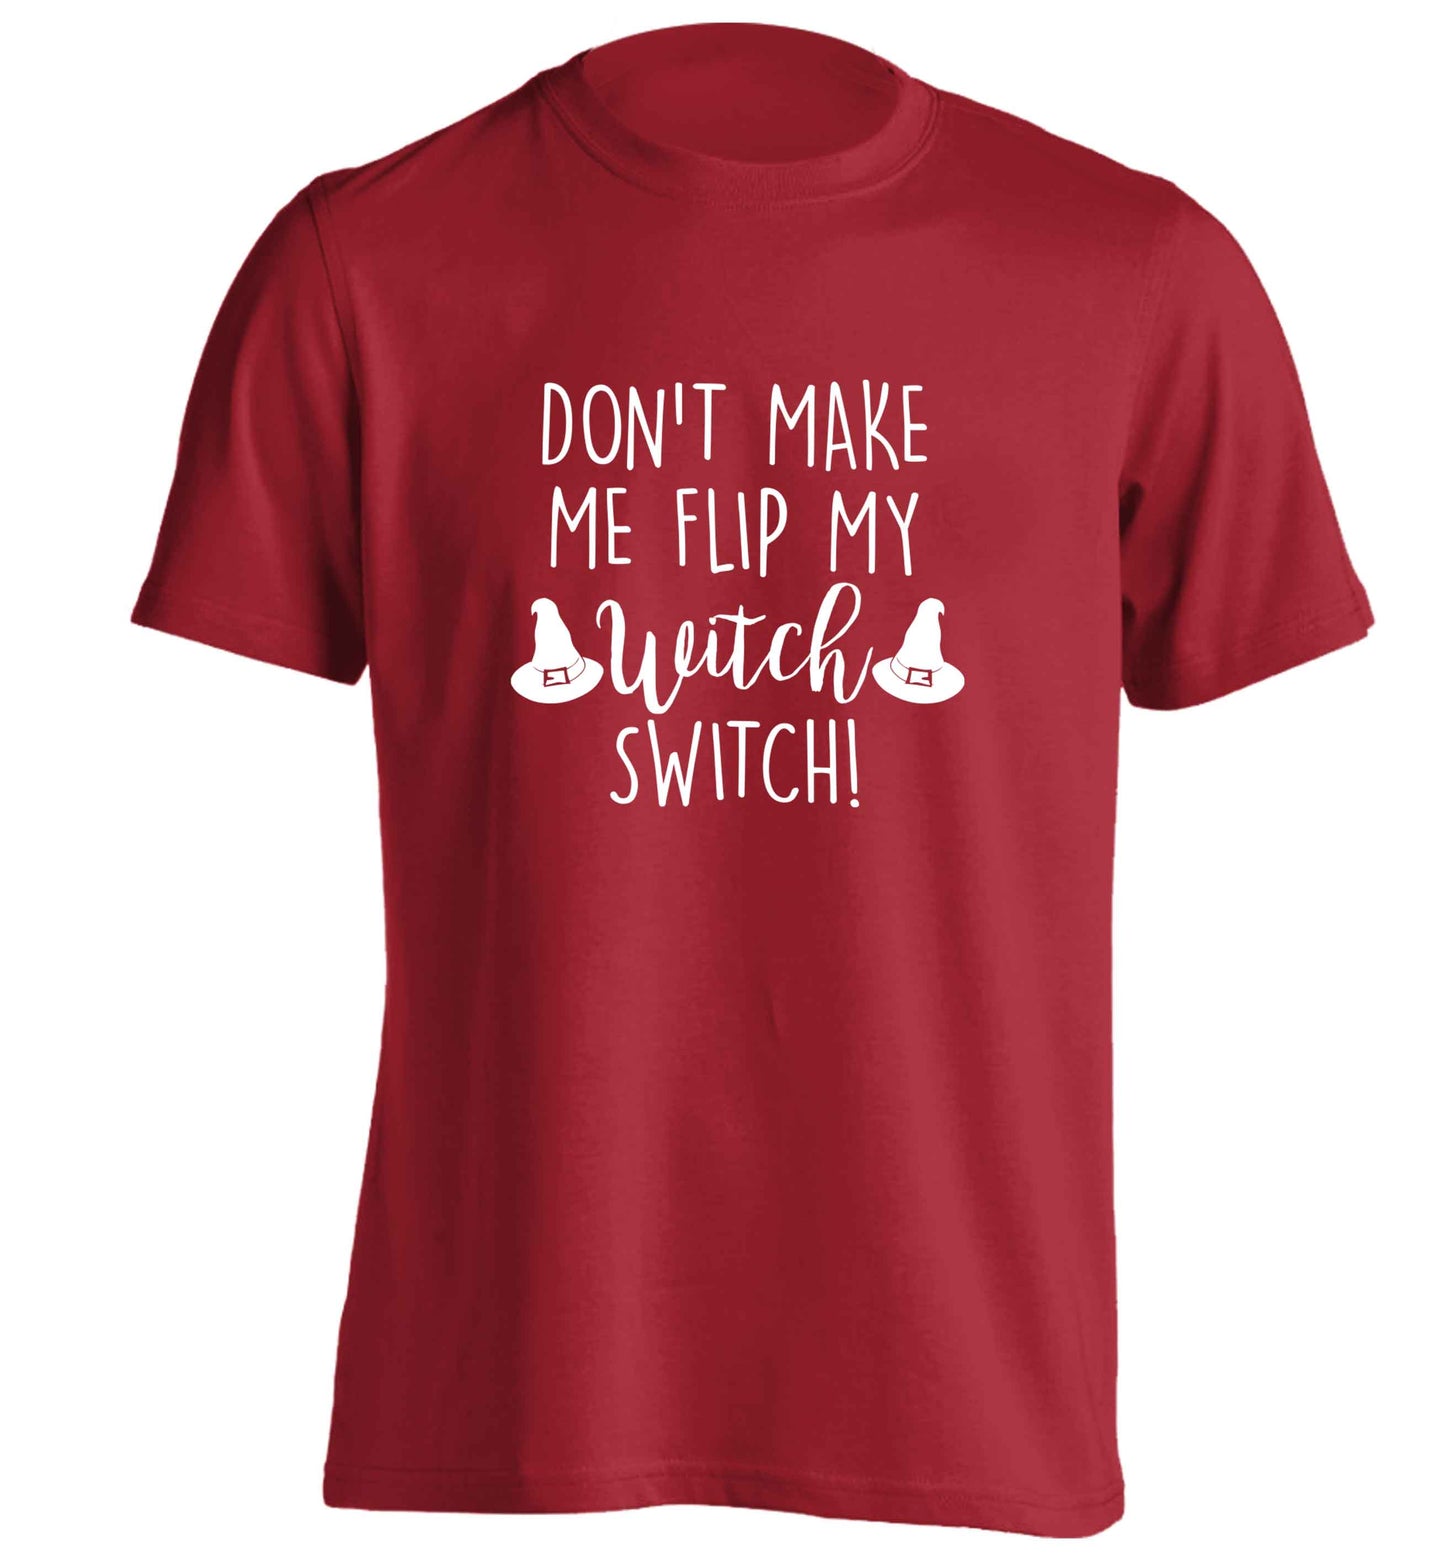 Don't make me flip my witch switch adults unisex red Tshirt 2XL